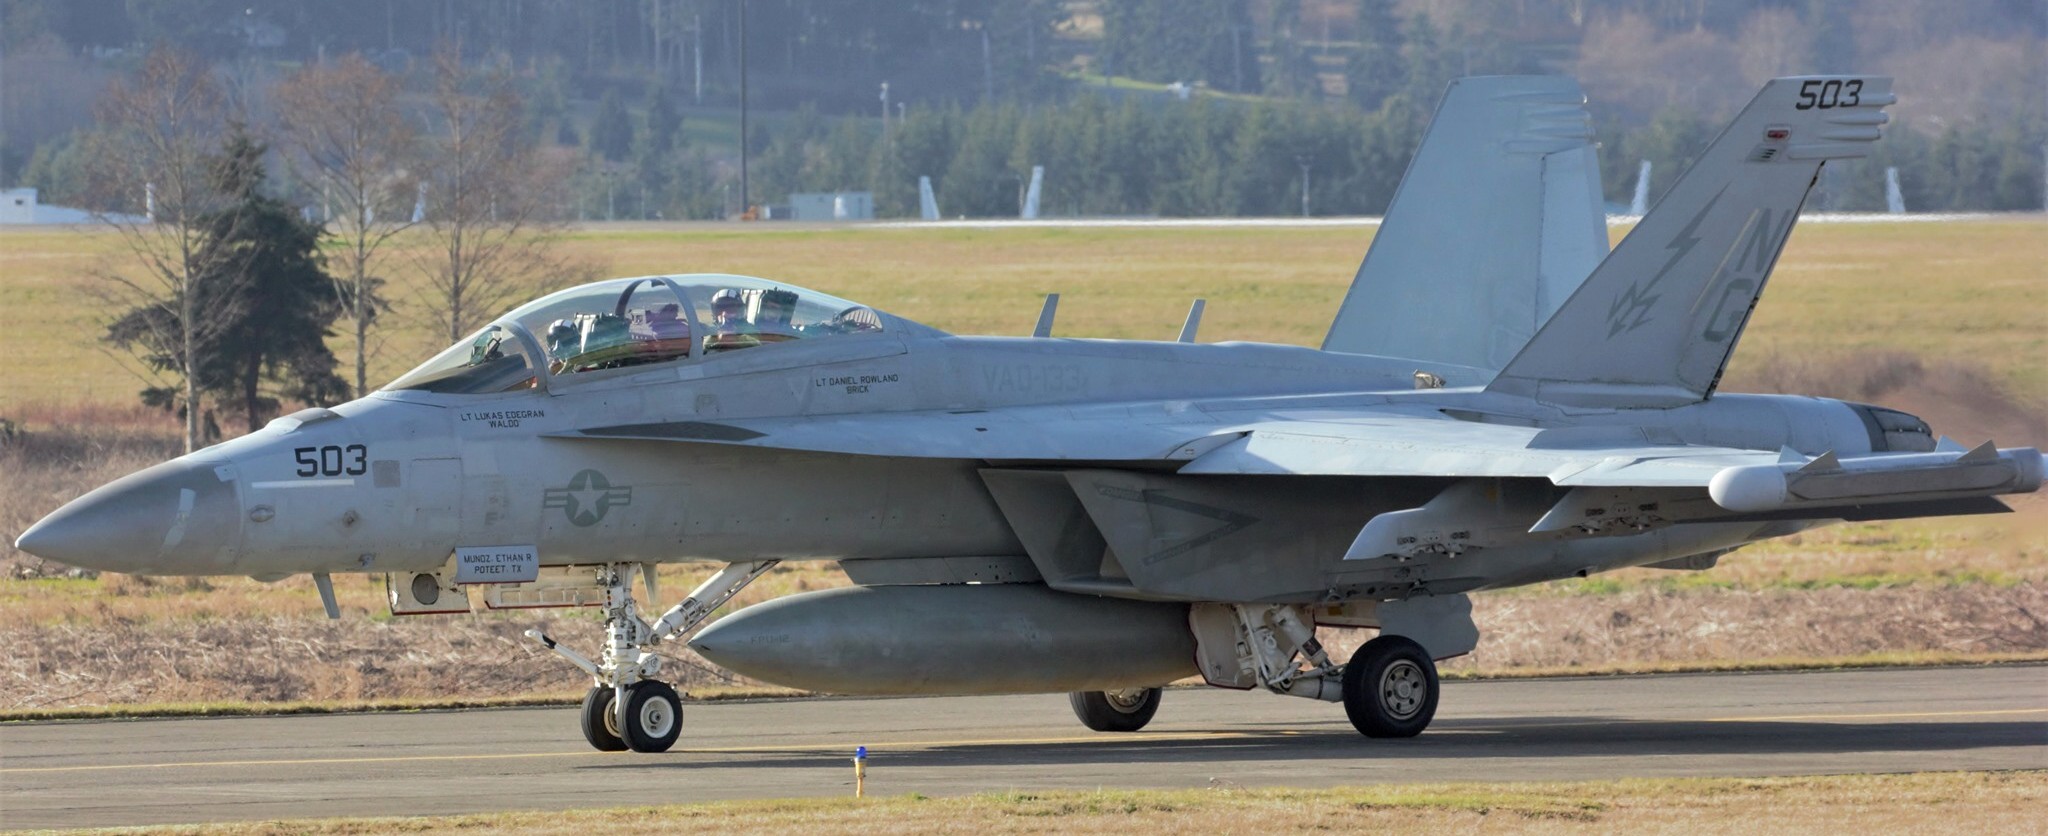 vaq-133 wizards electronic attack squadron vaqron us navy boeing ea-18g growler nas whidbey island 70